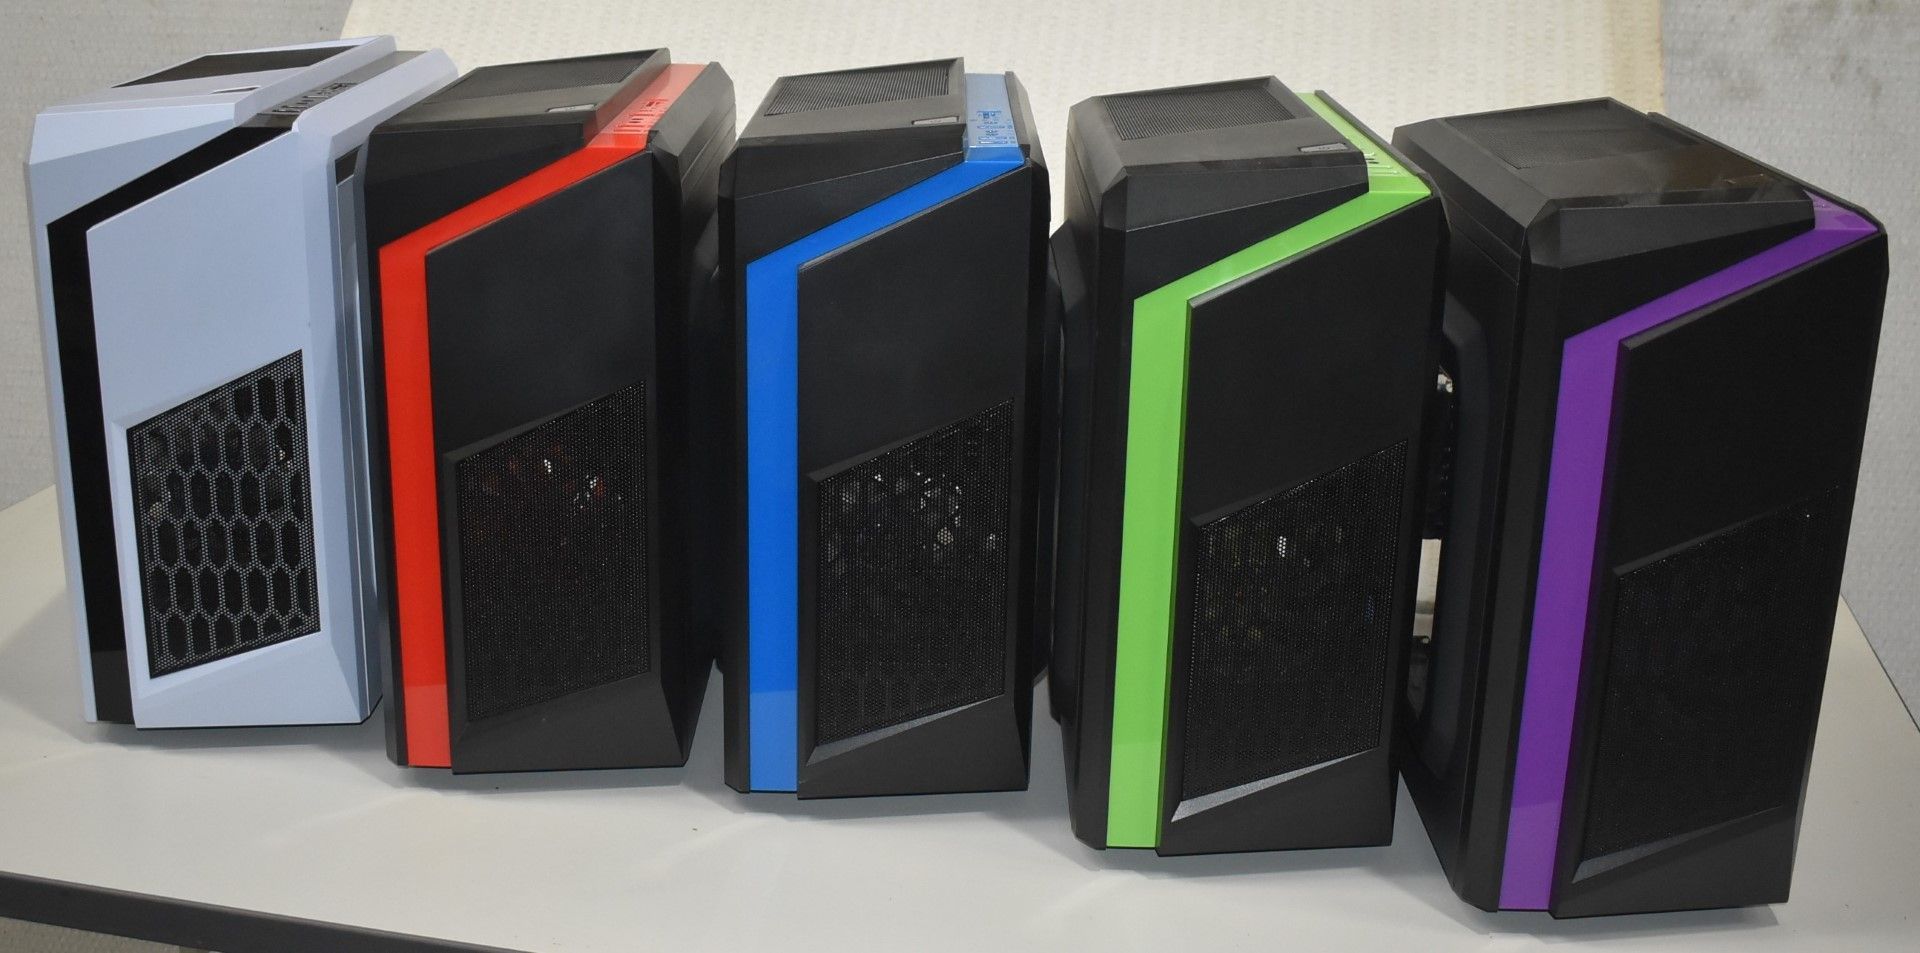 5 x ATX Computer Cases With USB 3.0, SD Card Readers, Side Window and Case Fan - Unused - Image 2 of 14